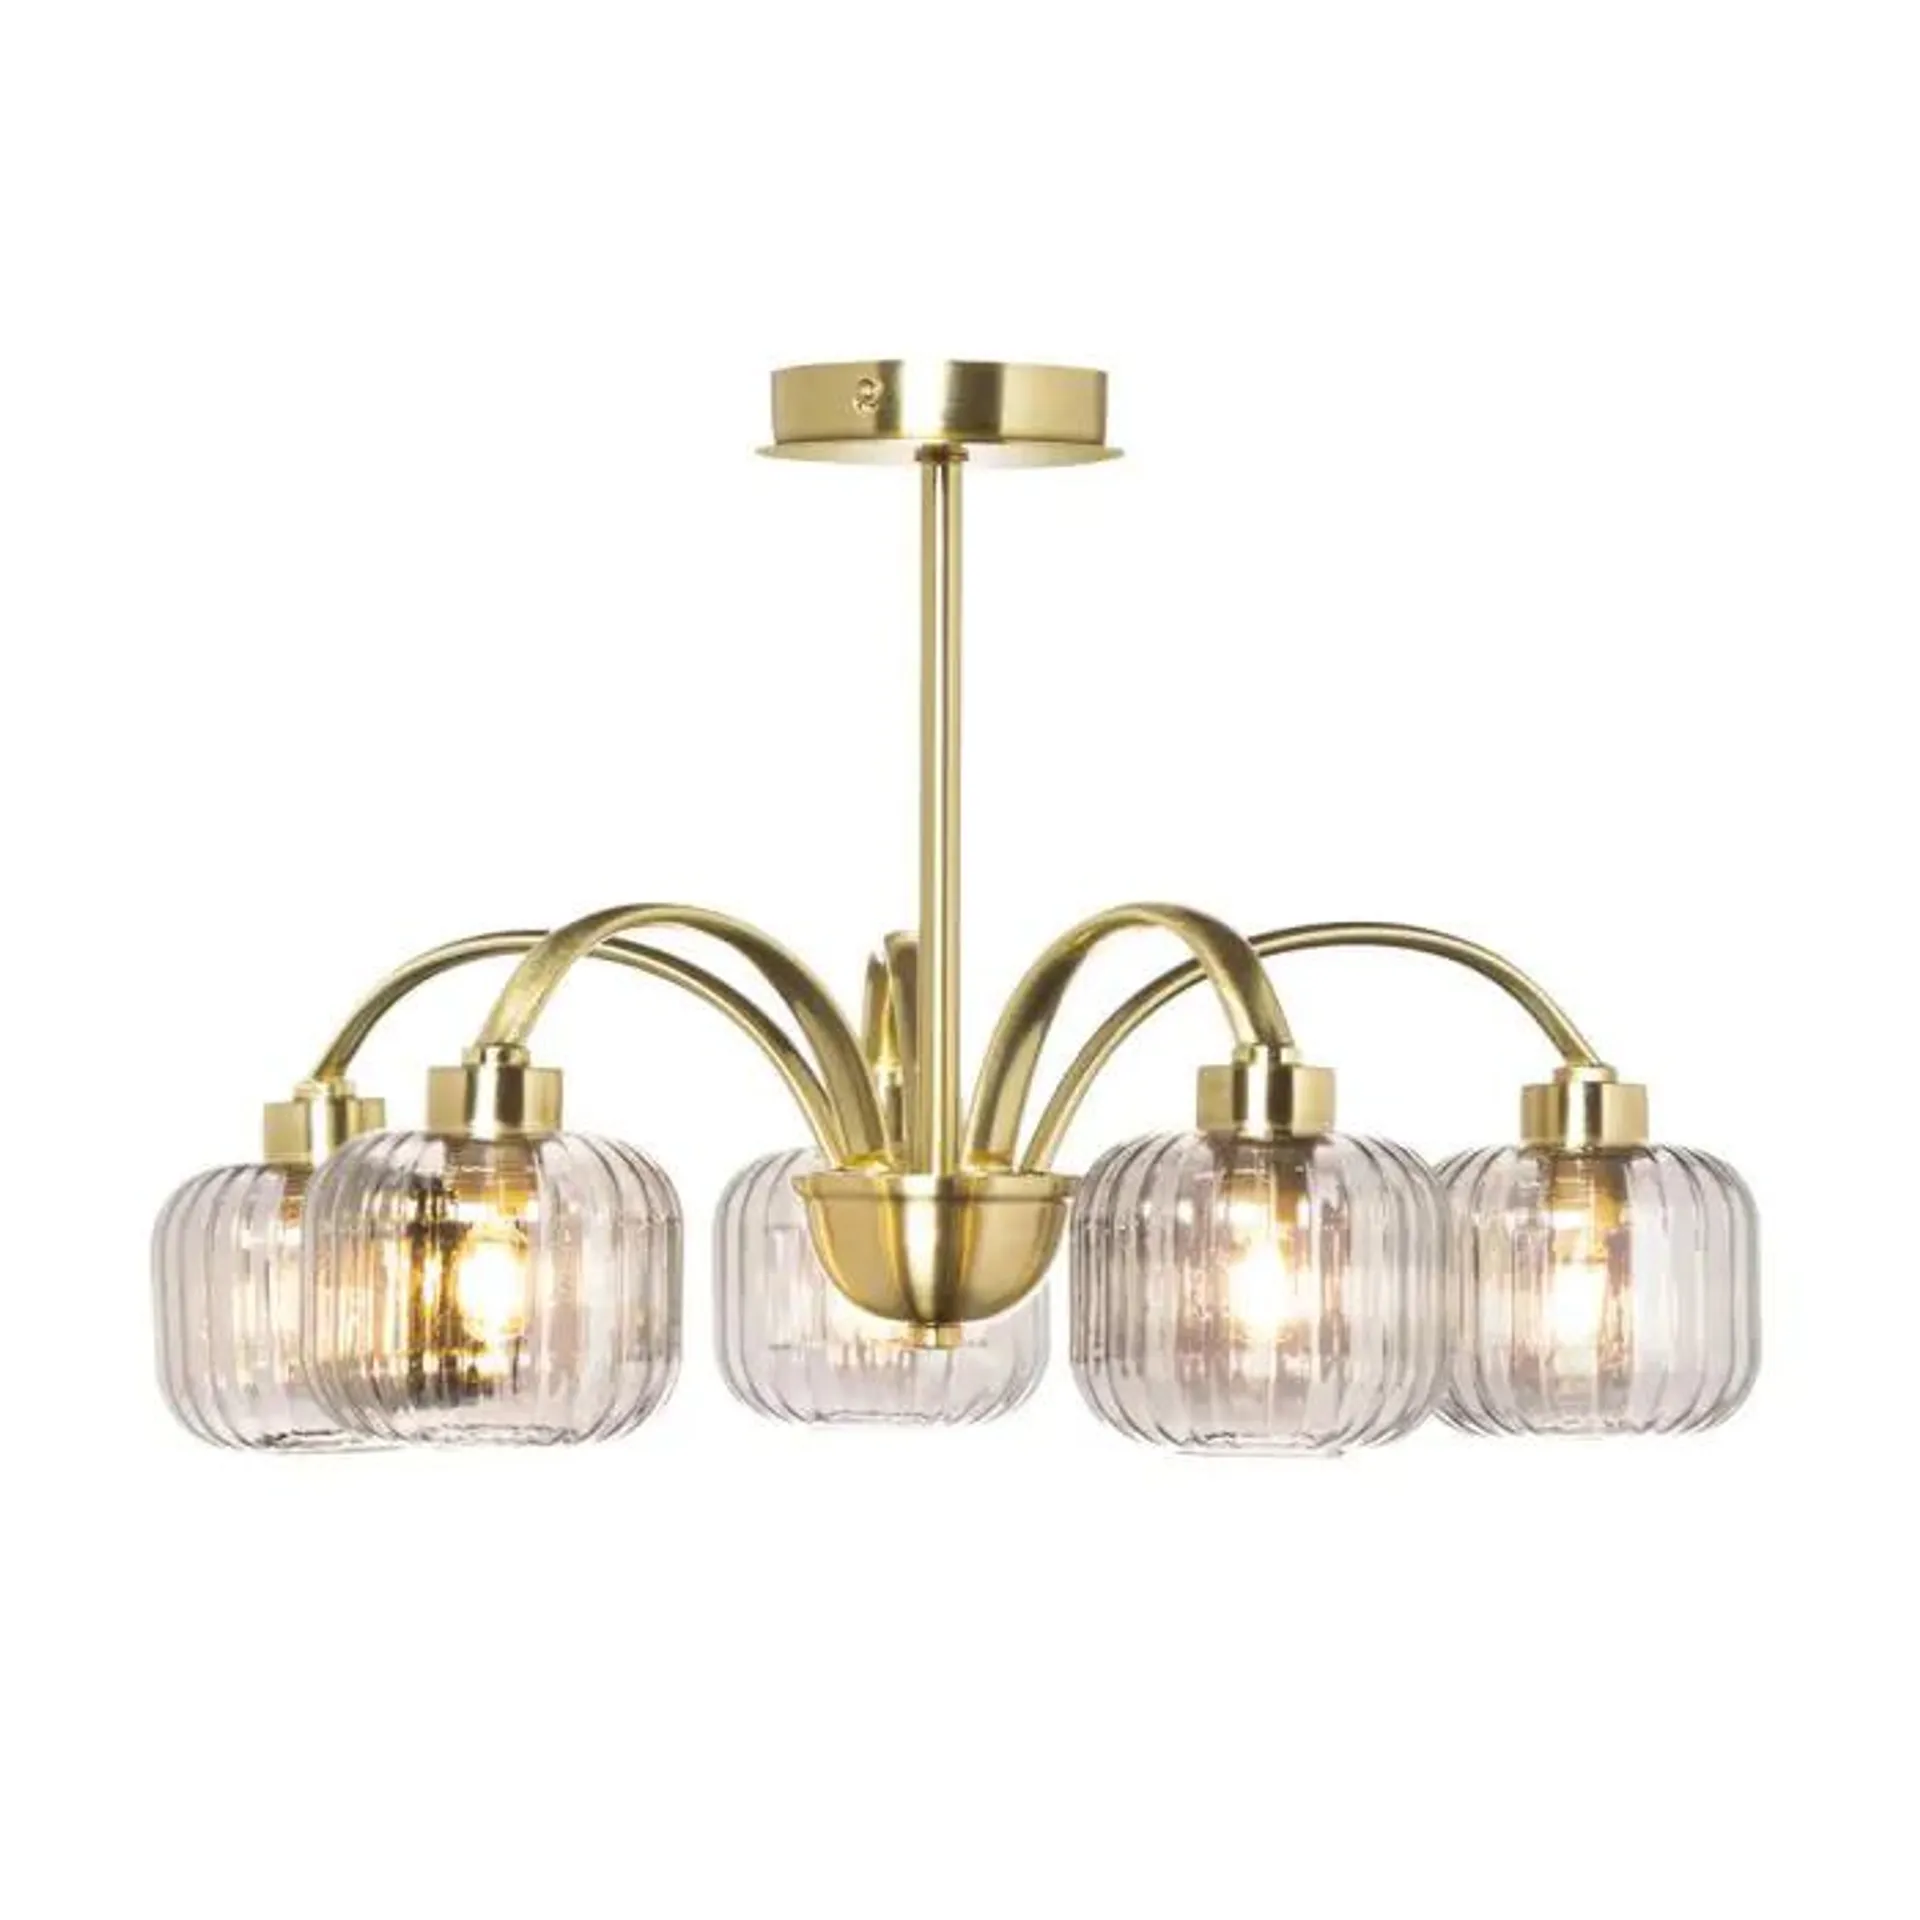 Lyna Large Semi Flush Ceiling Light with Smoked Glass Shades, Satin Brass